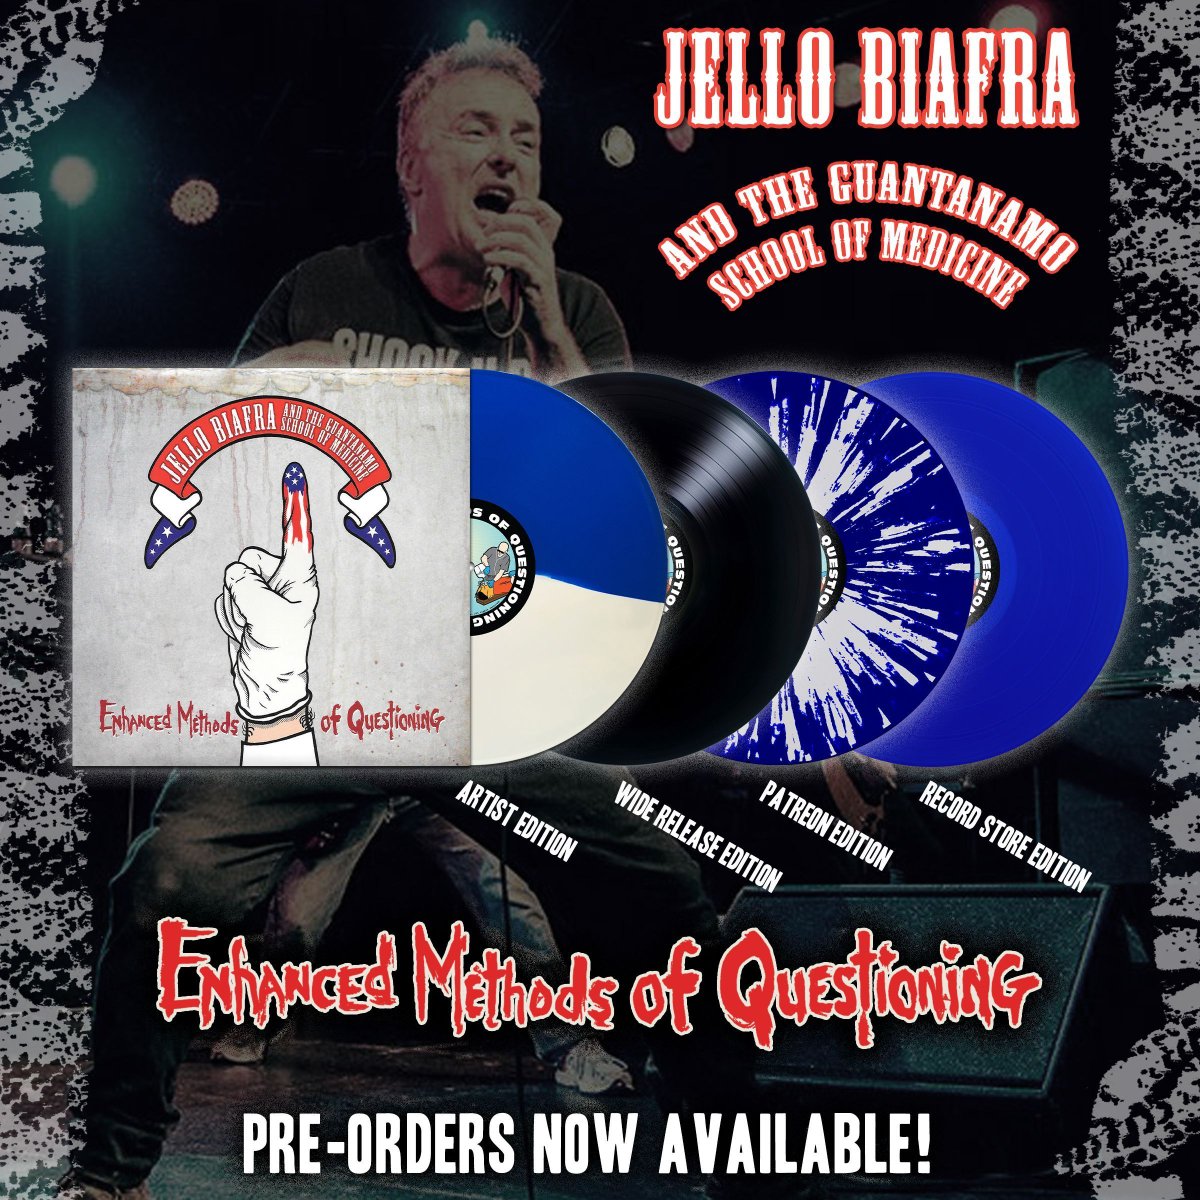 It's baaaaaack!!! The Jello Biafra and the Guantanamo School of Medicine sophomore album, 'Enhanced Methods of Questioning' is coming back in stock with some all new versions! Find them at: buff.ly/3OMAFsS